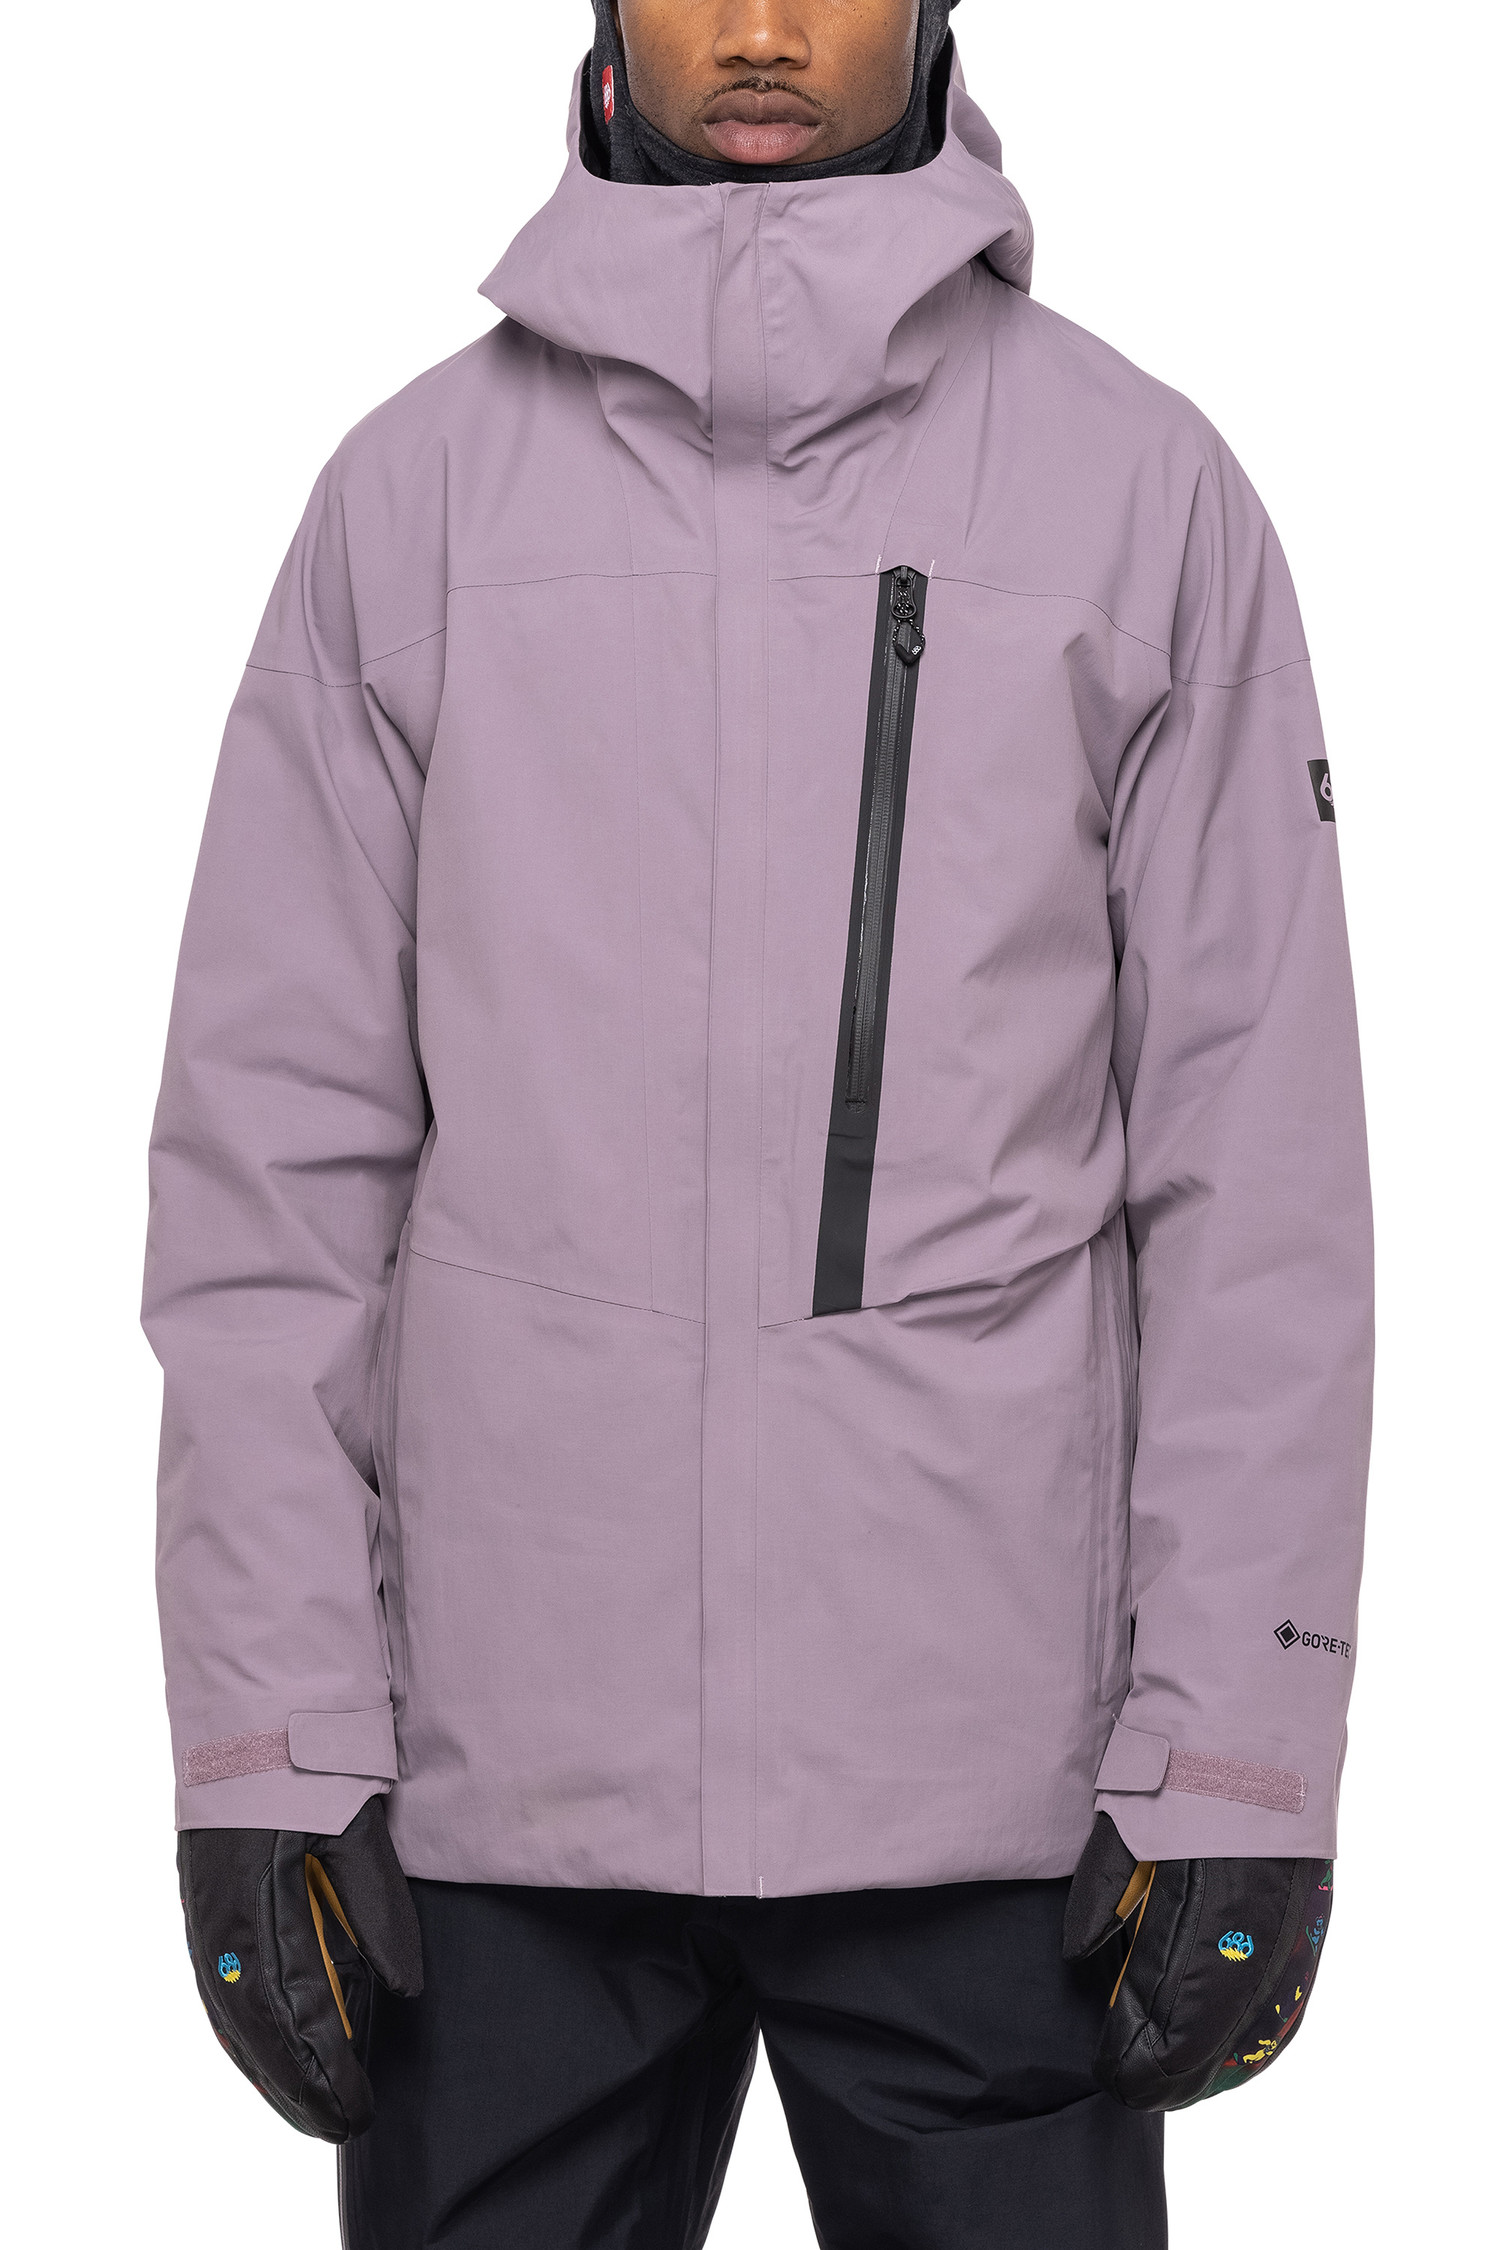 686 | Men's GORE-TEX GT Jacket - Dusty Orchid - Sully's Lifestyle